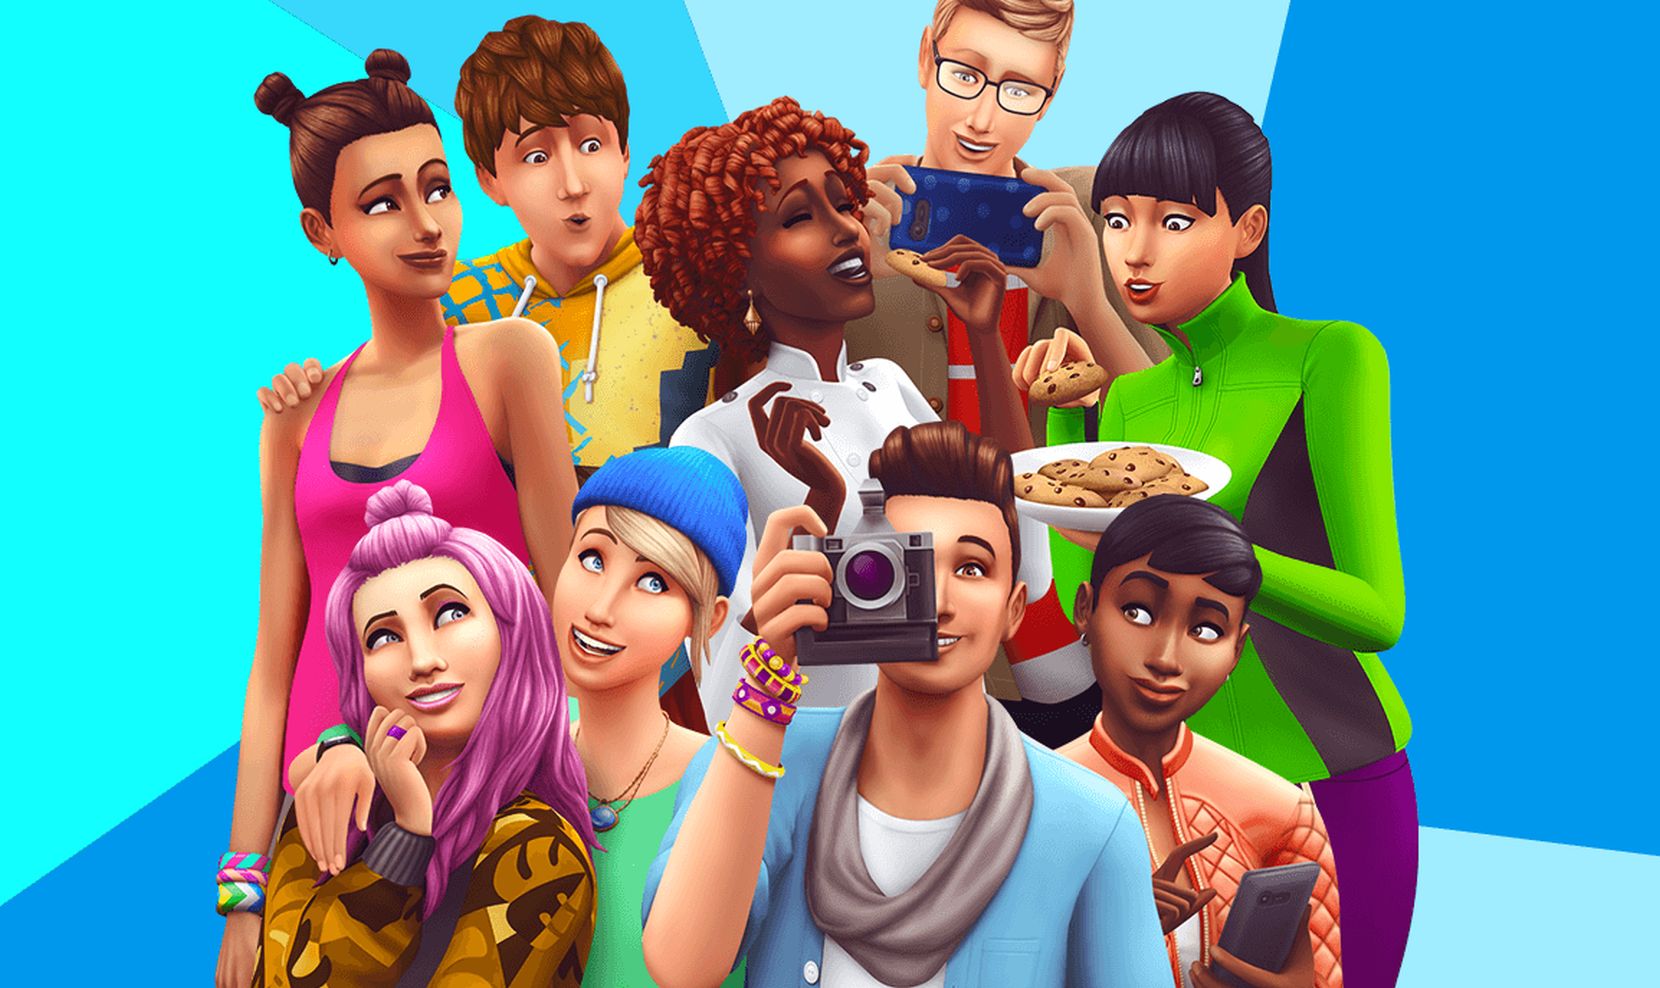 Image for Looks like The Sims 4 is getting a wedding-themed Game Pack